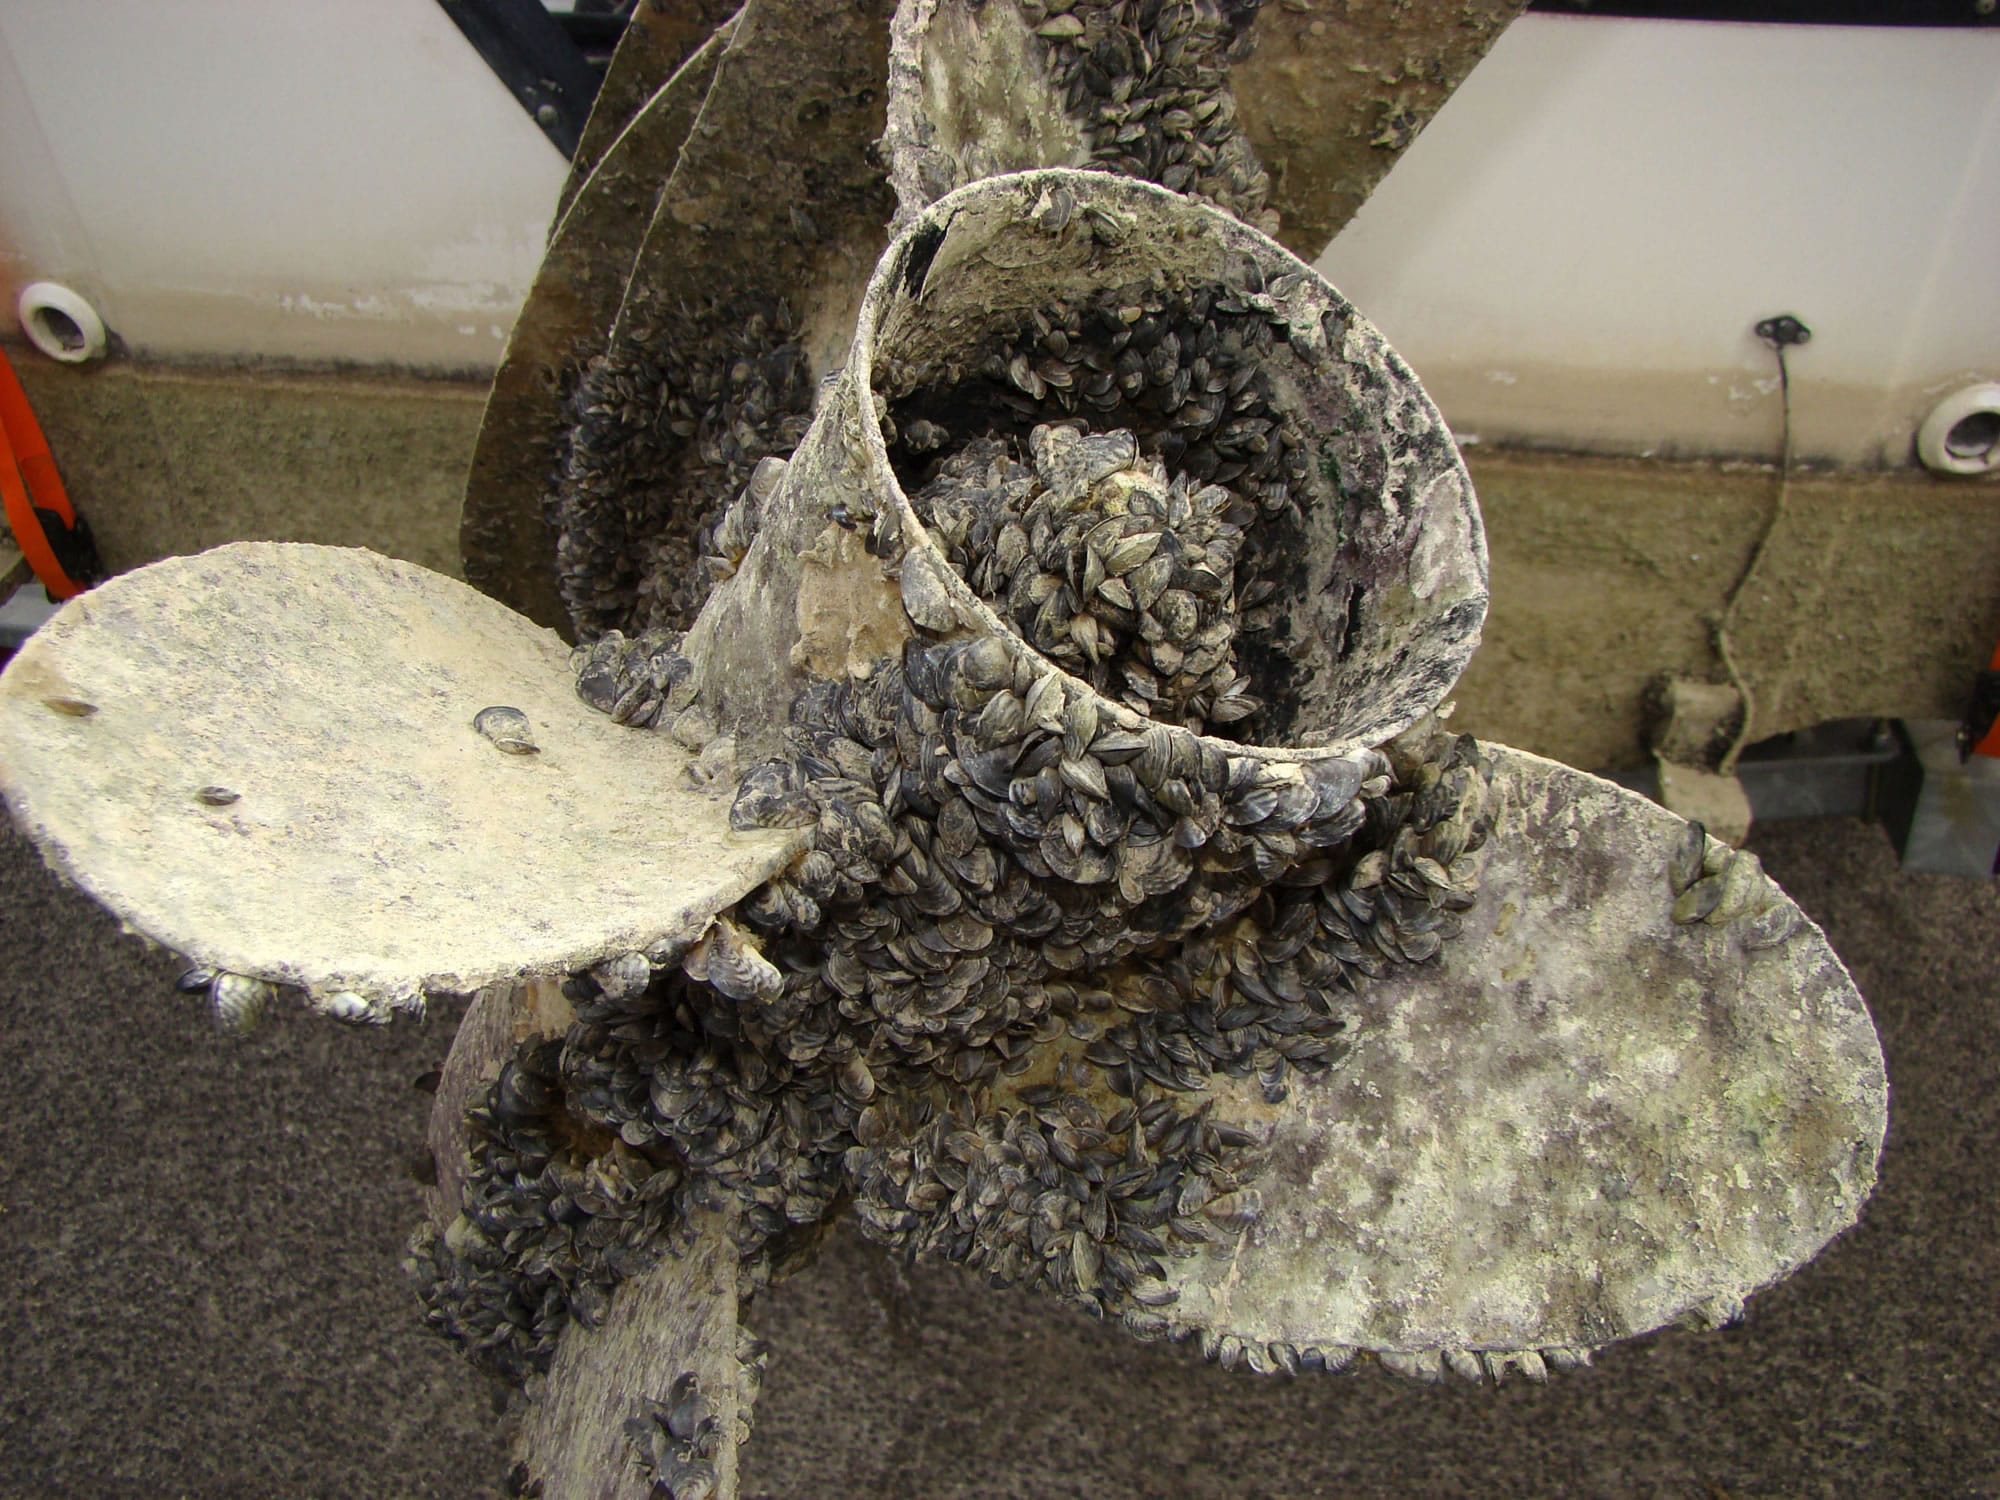 Here's what quagga mussels did to the lower unit of a boat at Lake Mead on the Colorado River.